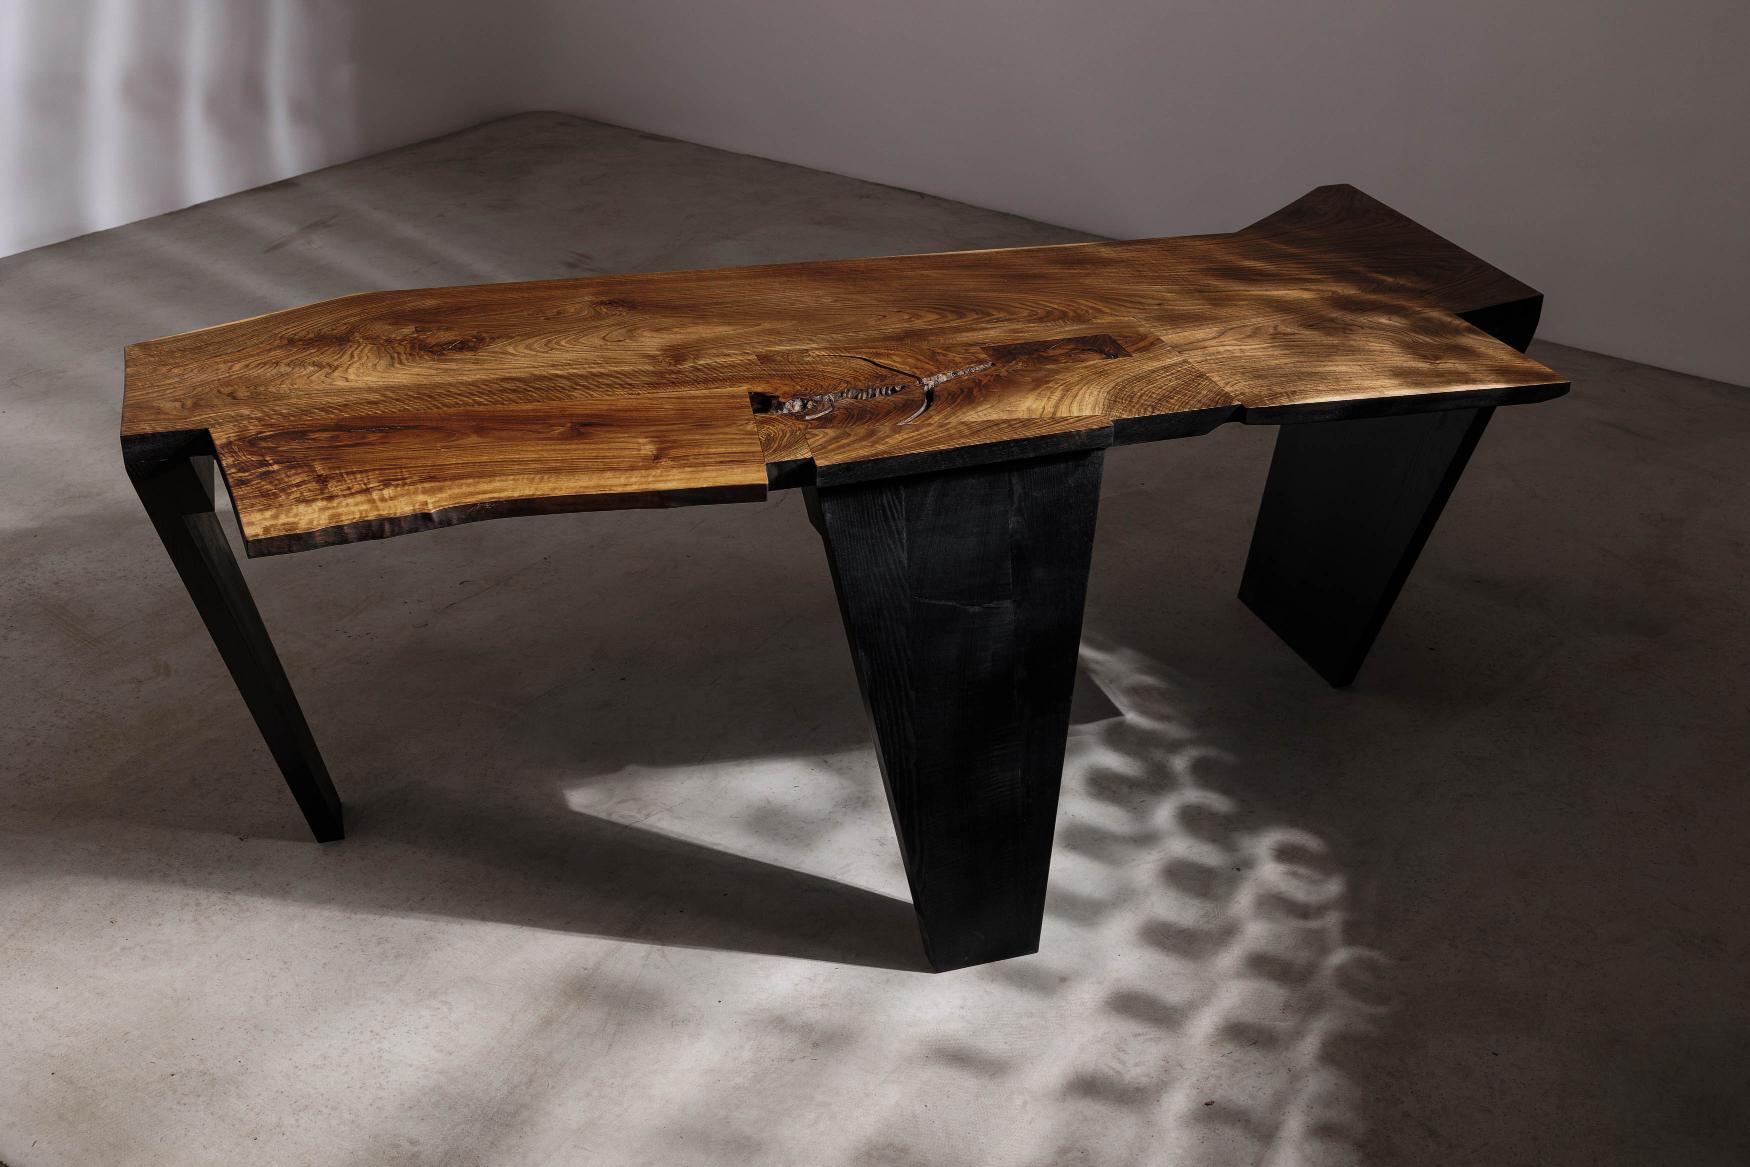 EM207 desk by Eero Moss
One of a kind
Dimensions; W 215 x D 76 x H 75 cm
Materials: Walnut, ash, India ink.
Finish: Natural oils.

18 Brut Collection

The latest collection by the artist is a tribute to the brutalist movement, infused with the power